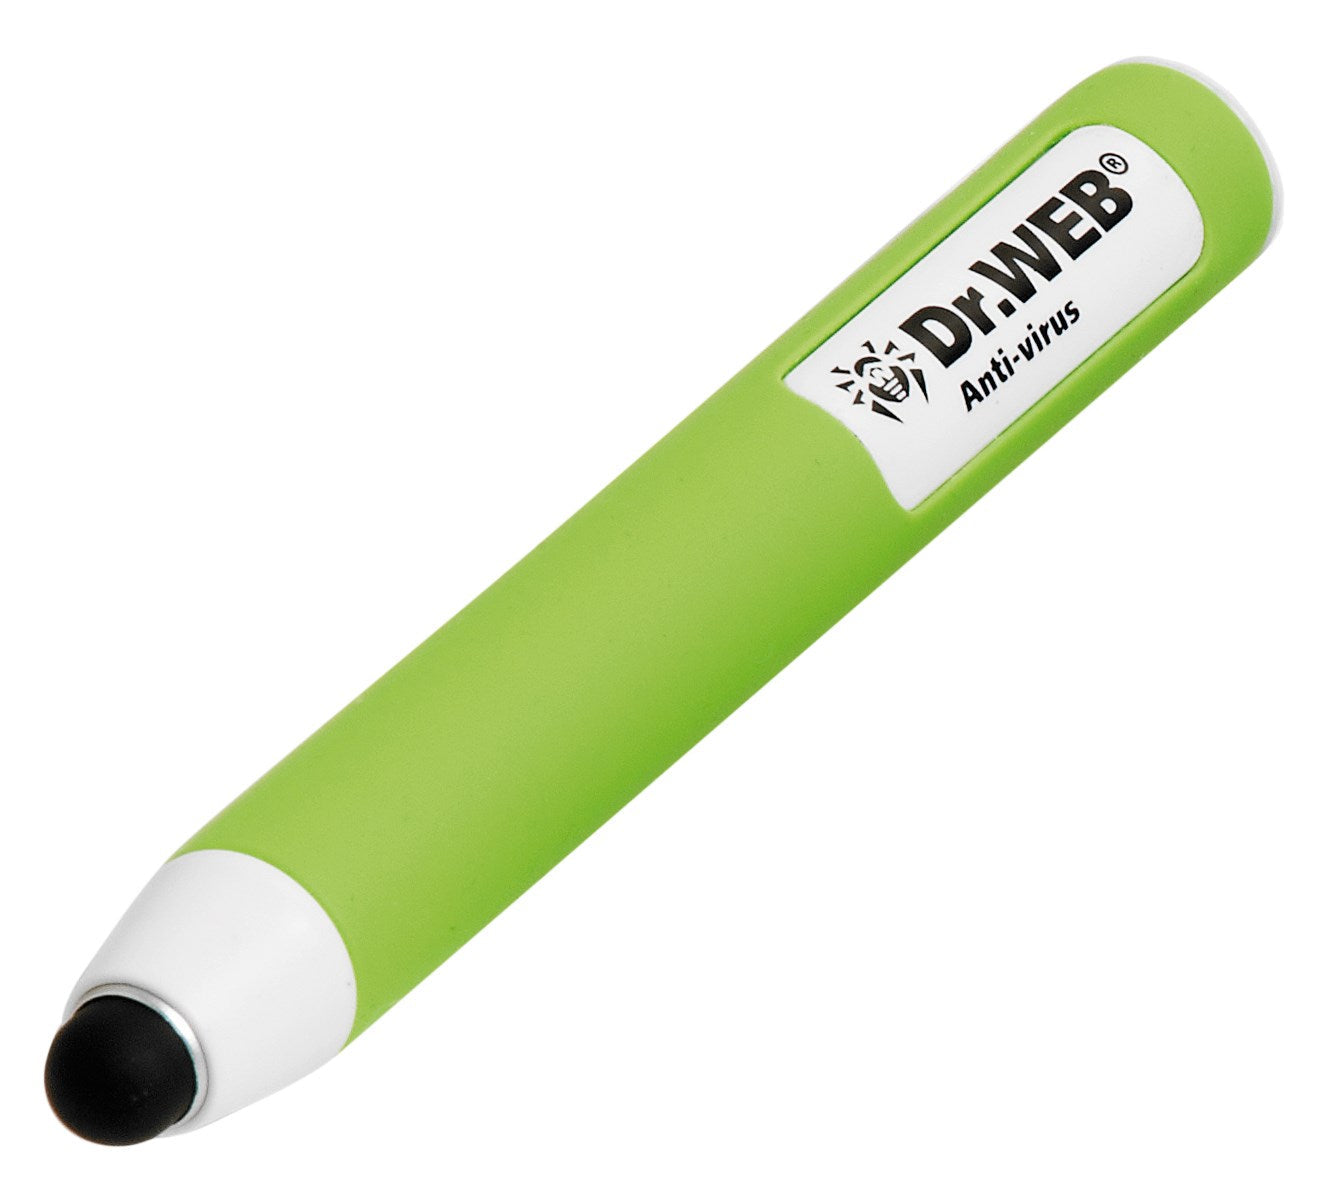 Styli Touch-Free Stylus Tool - Red Lime / L - Pens